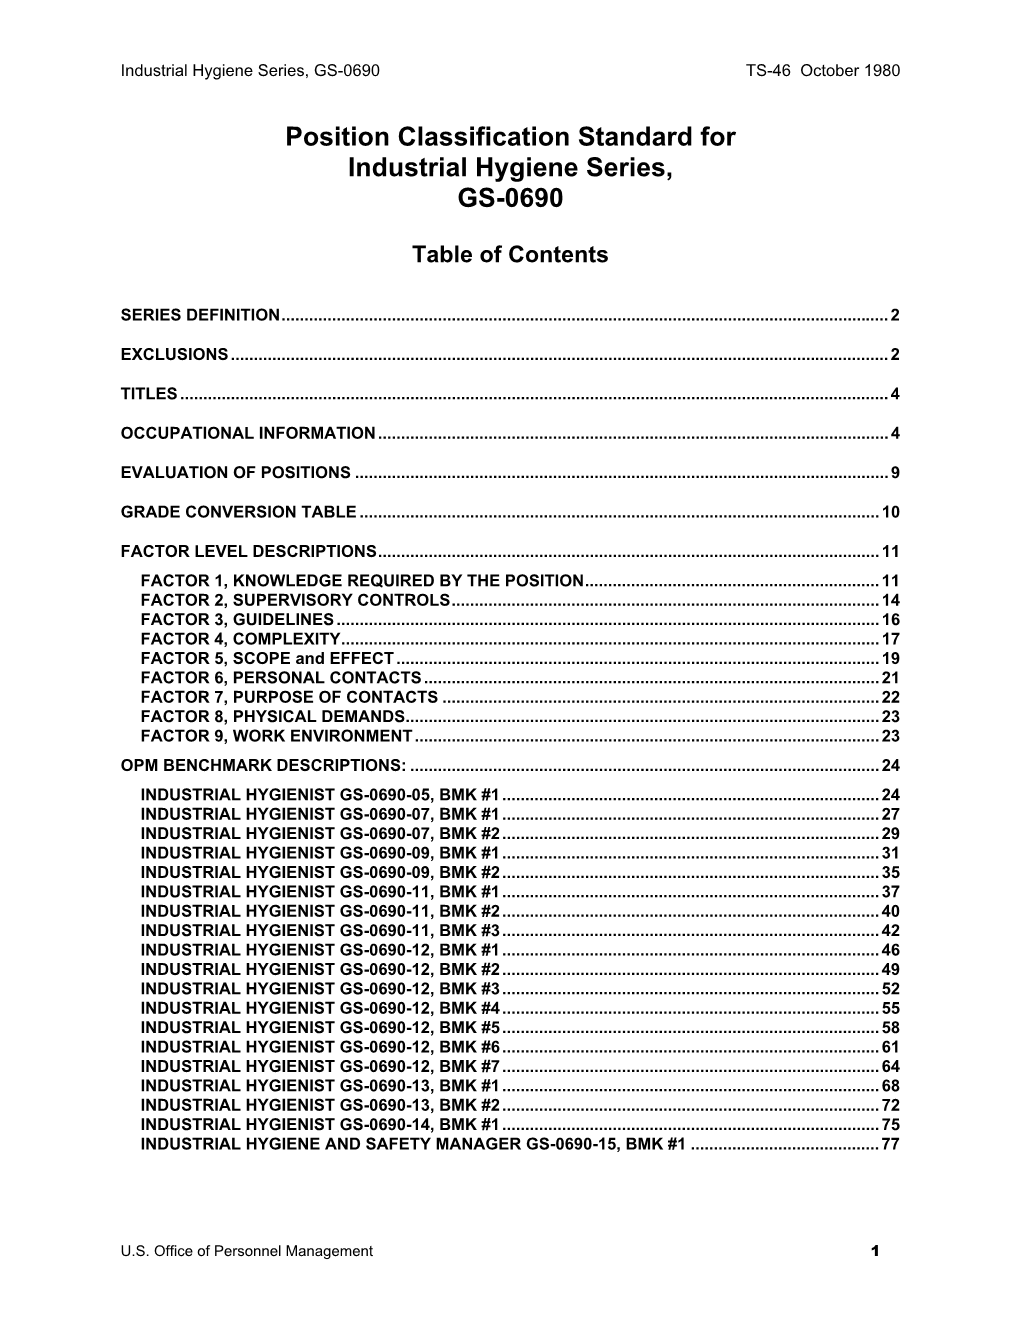 Position Classification Standard for Industrial Hygiene Series, GS-0690